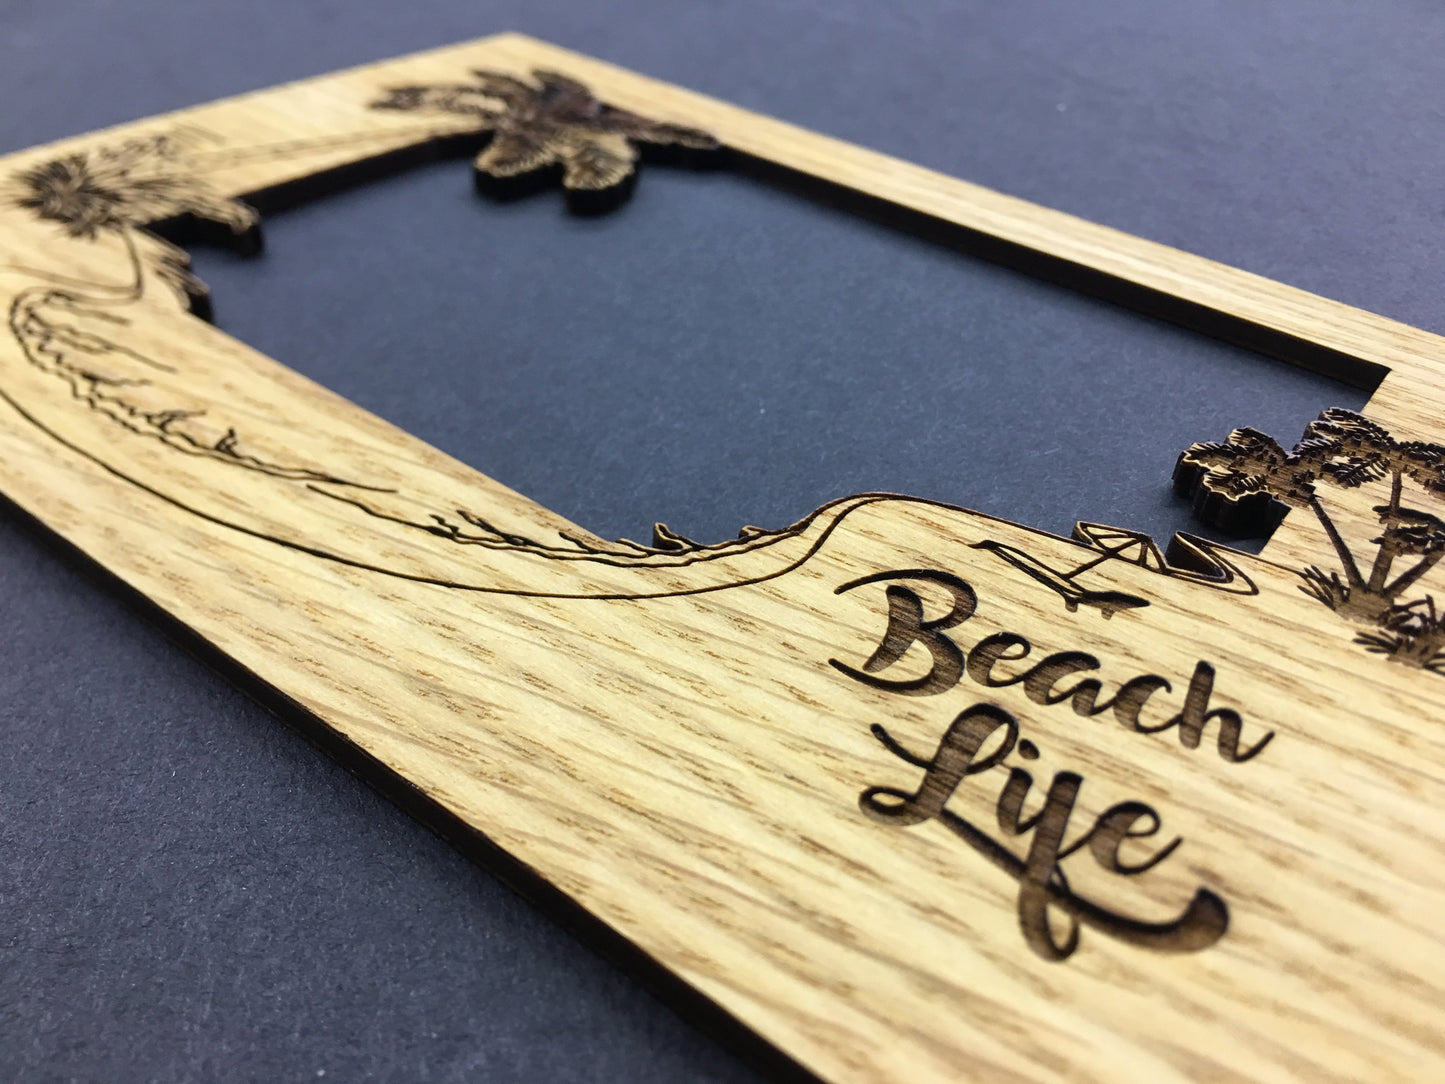 Beach Life Picture Frame